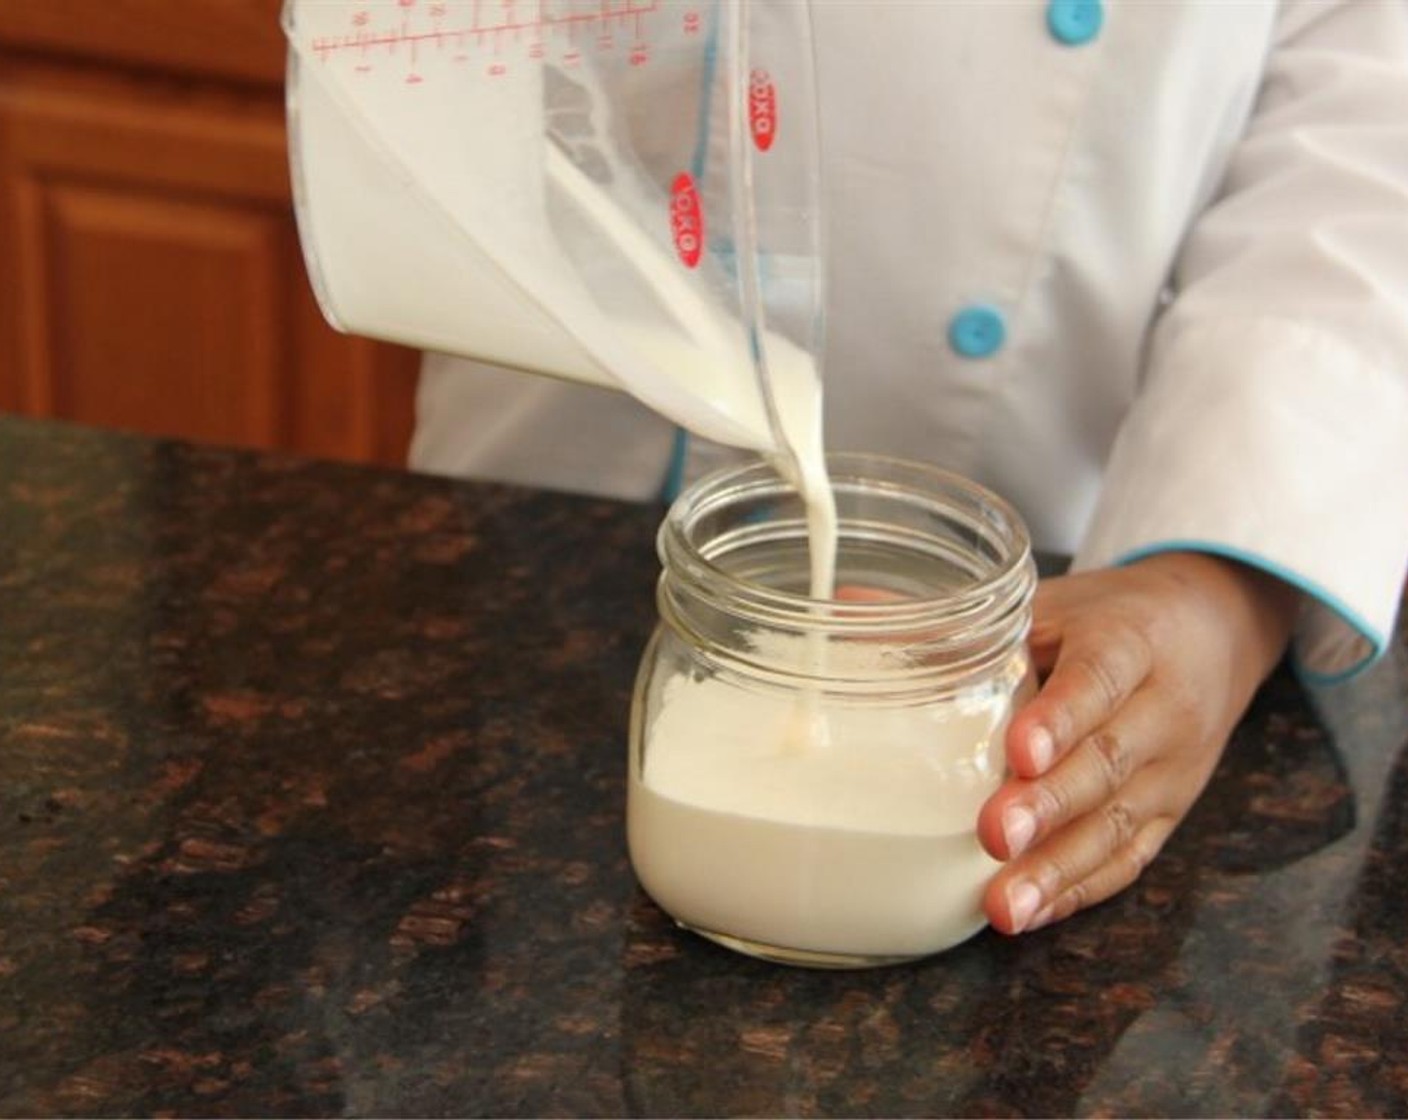 step 7 For the homemade whipped cream, add the Heavy Cream (1 cup), Vanilla Extract (1 tsp), and Granulated Sugar (3 Tbsp) in a tightly closed mason jar and then shake for a couple of minutes until thick and creamy.